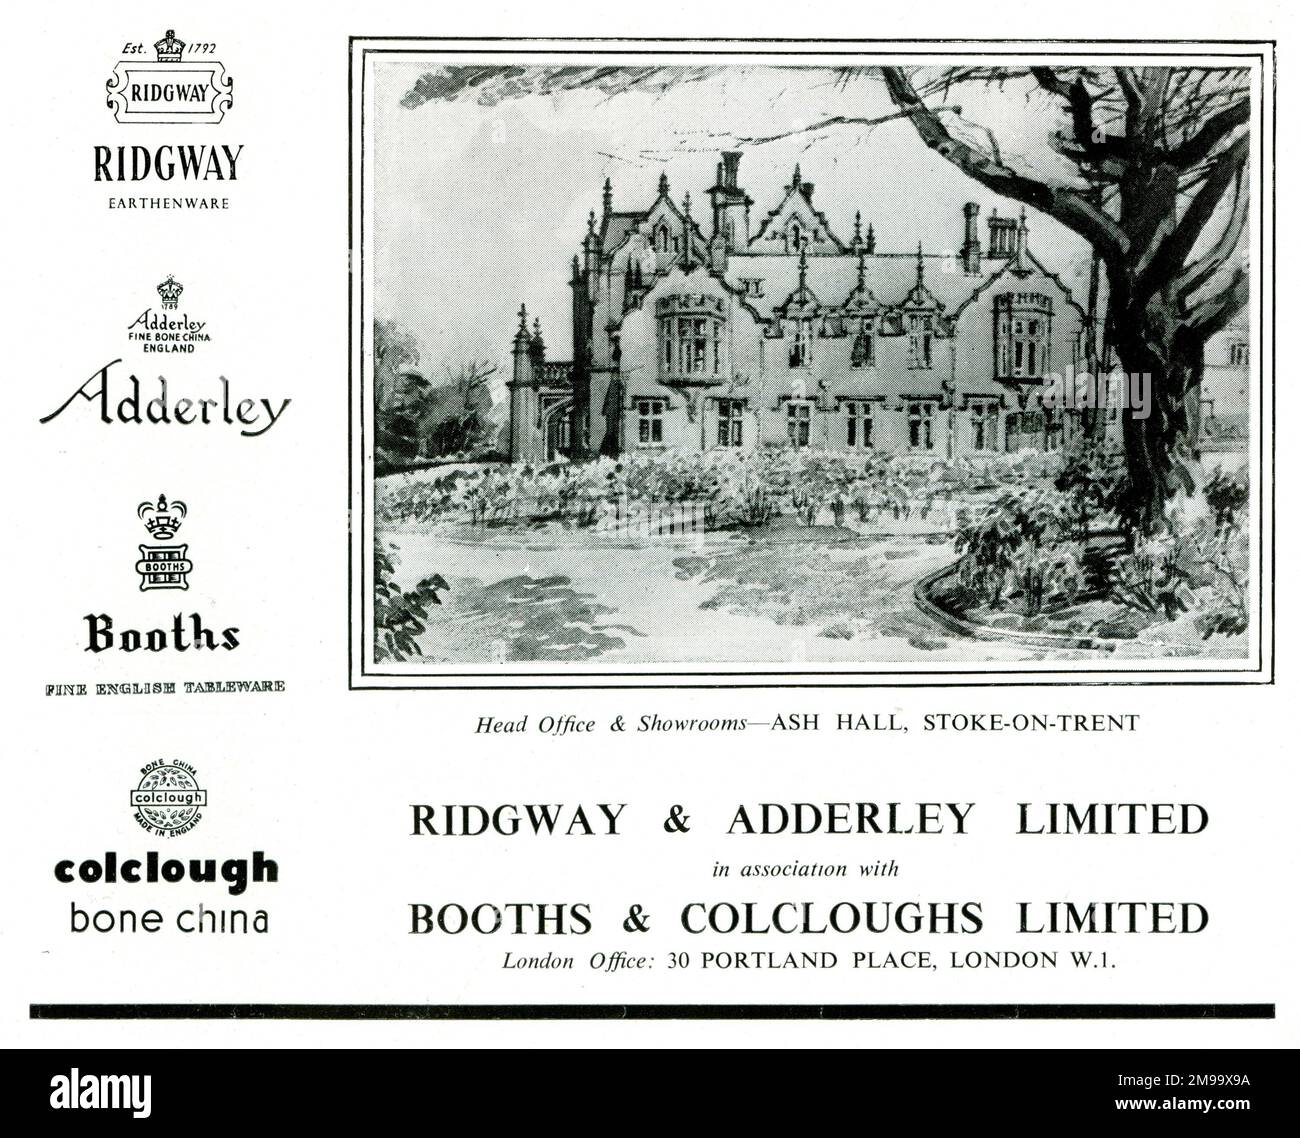 Advert for Ridgway & Adderley Limited in association with Booths & Colcloughs Limited, Ash Hall, Stoke-on-Trent and Portland Place, London. Stock Photo